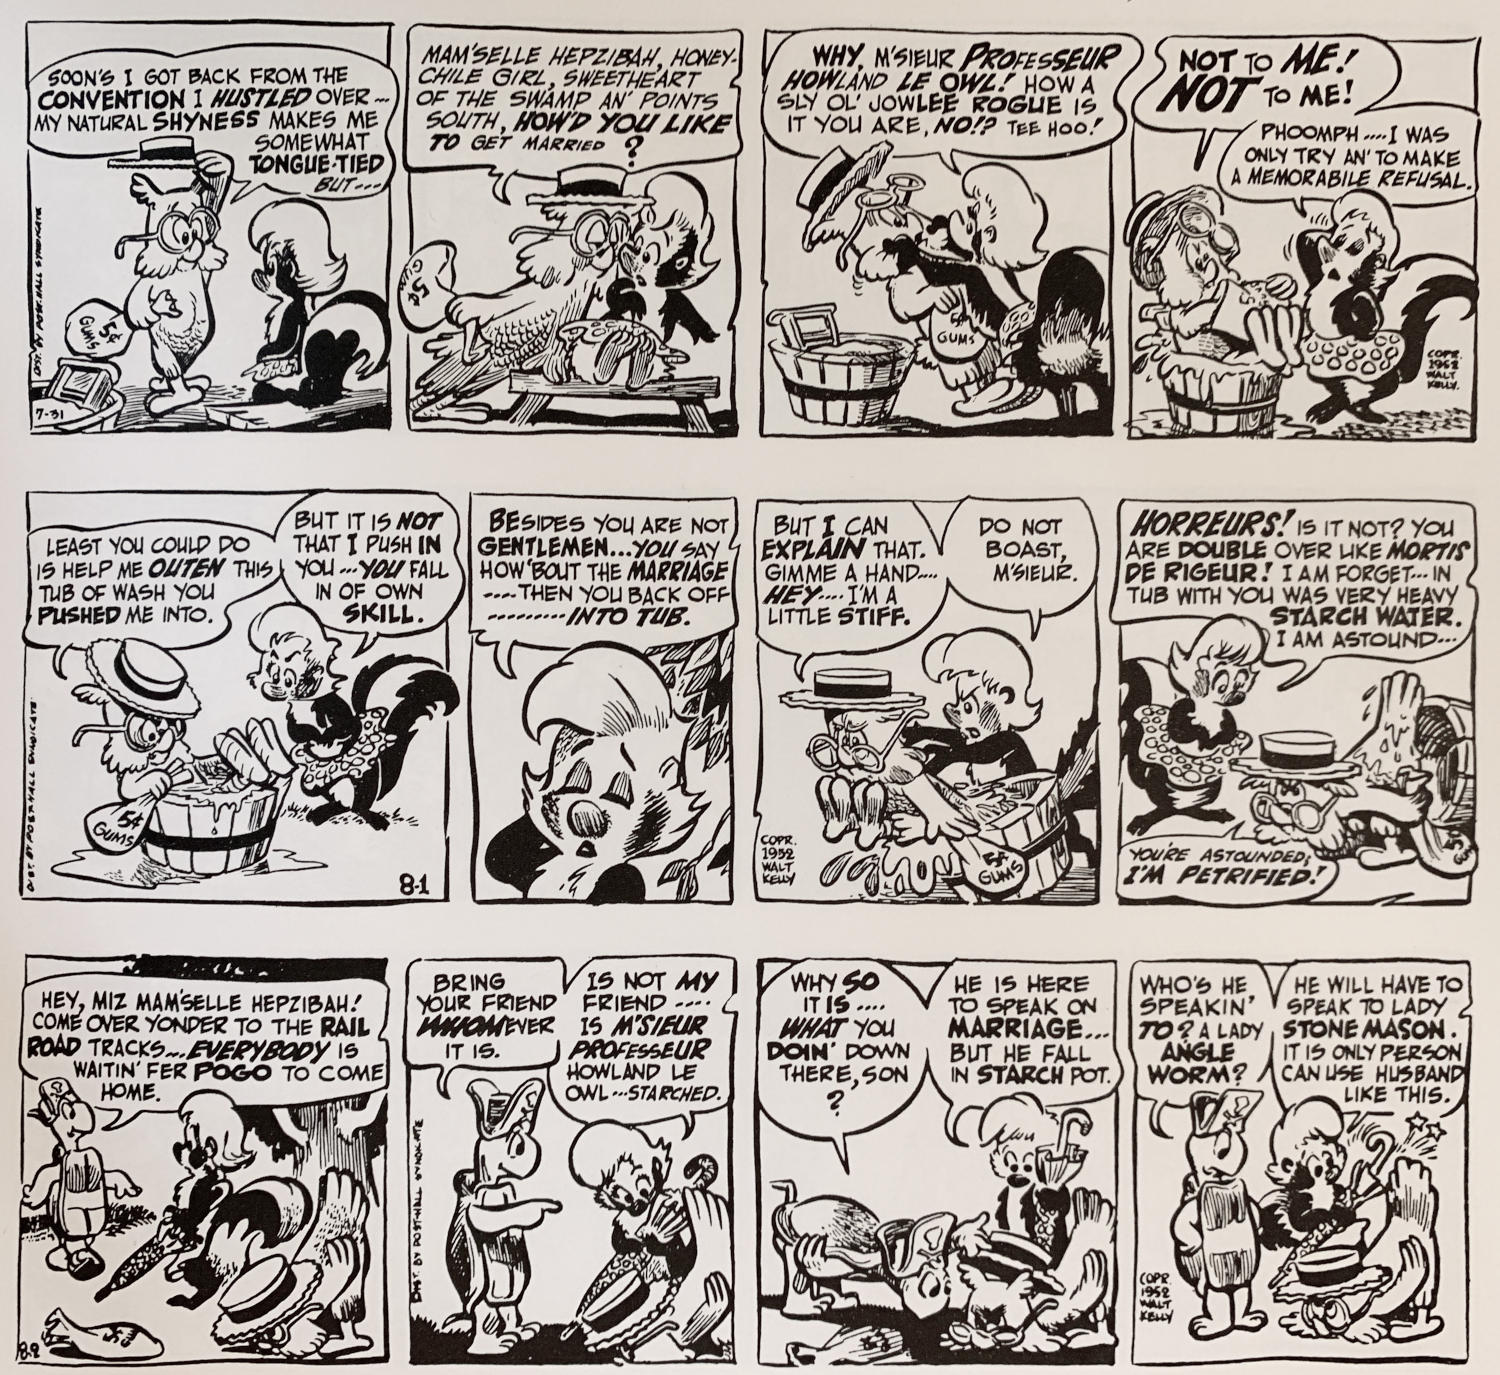 Three strips, showing Howland's misguided efforts to woo Hepzibah